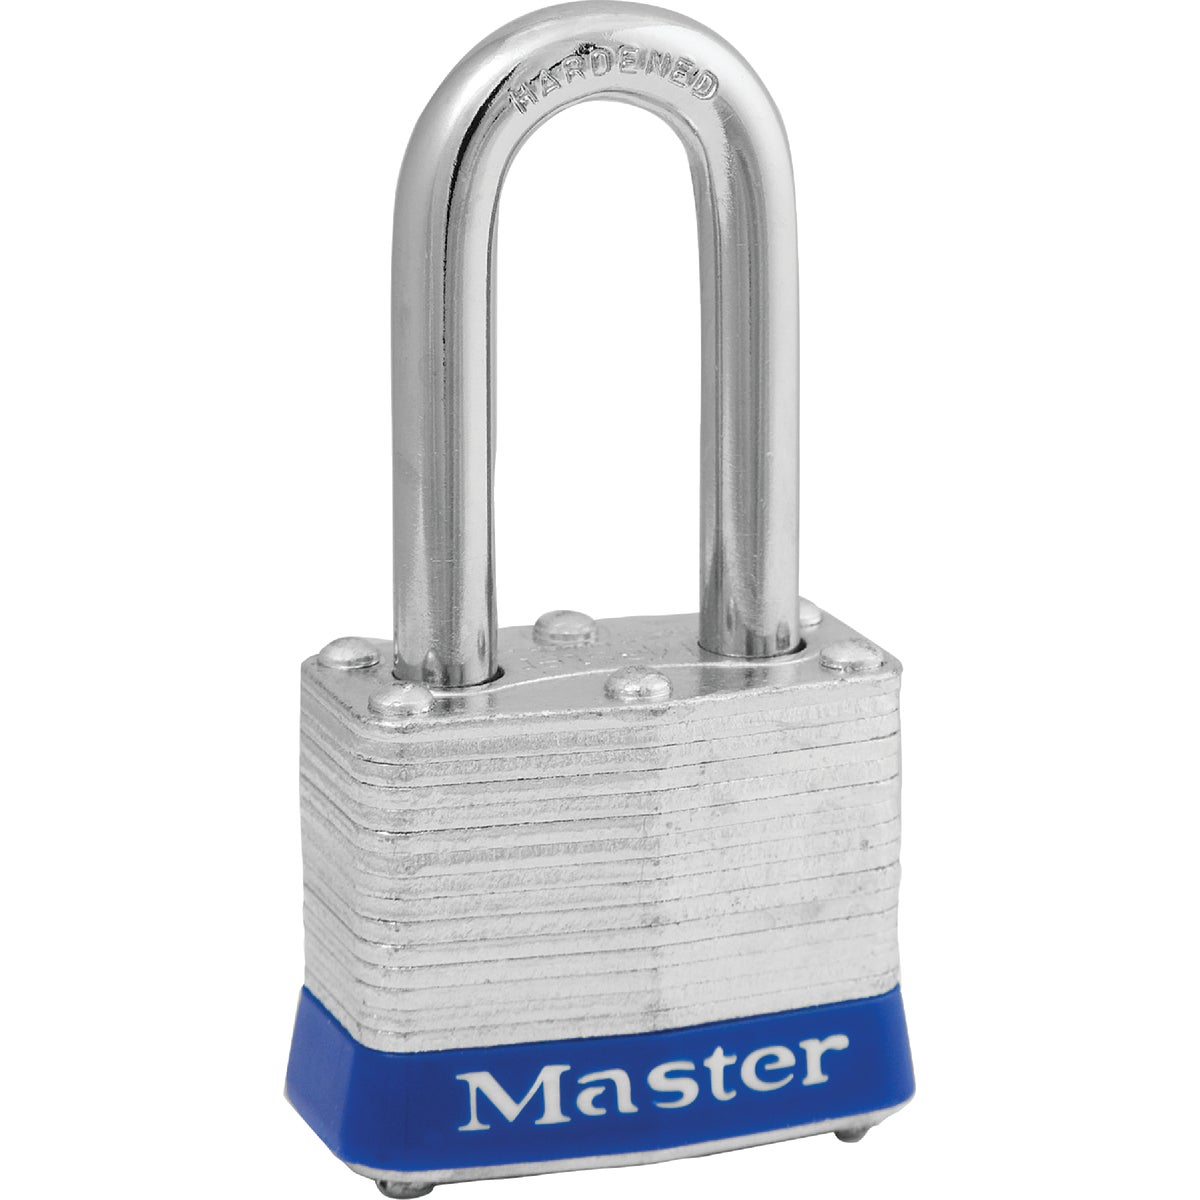 Master Lock 1-9/16 In. W. Universal Pin Keyed Padlock with 1-1/2 In. Shackle